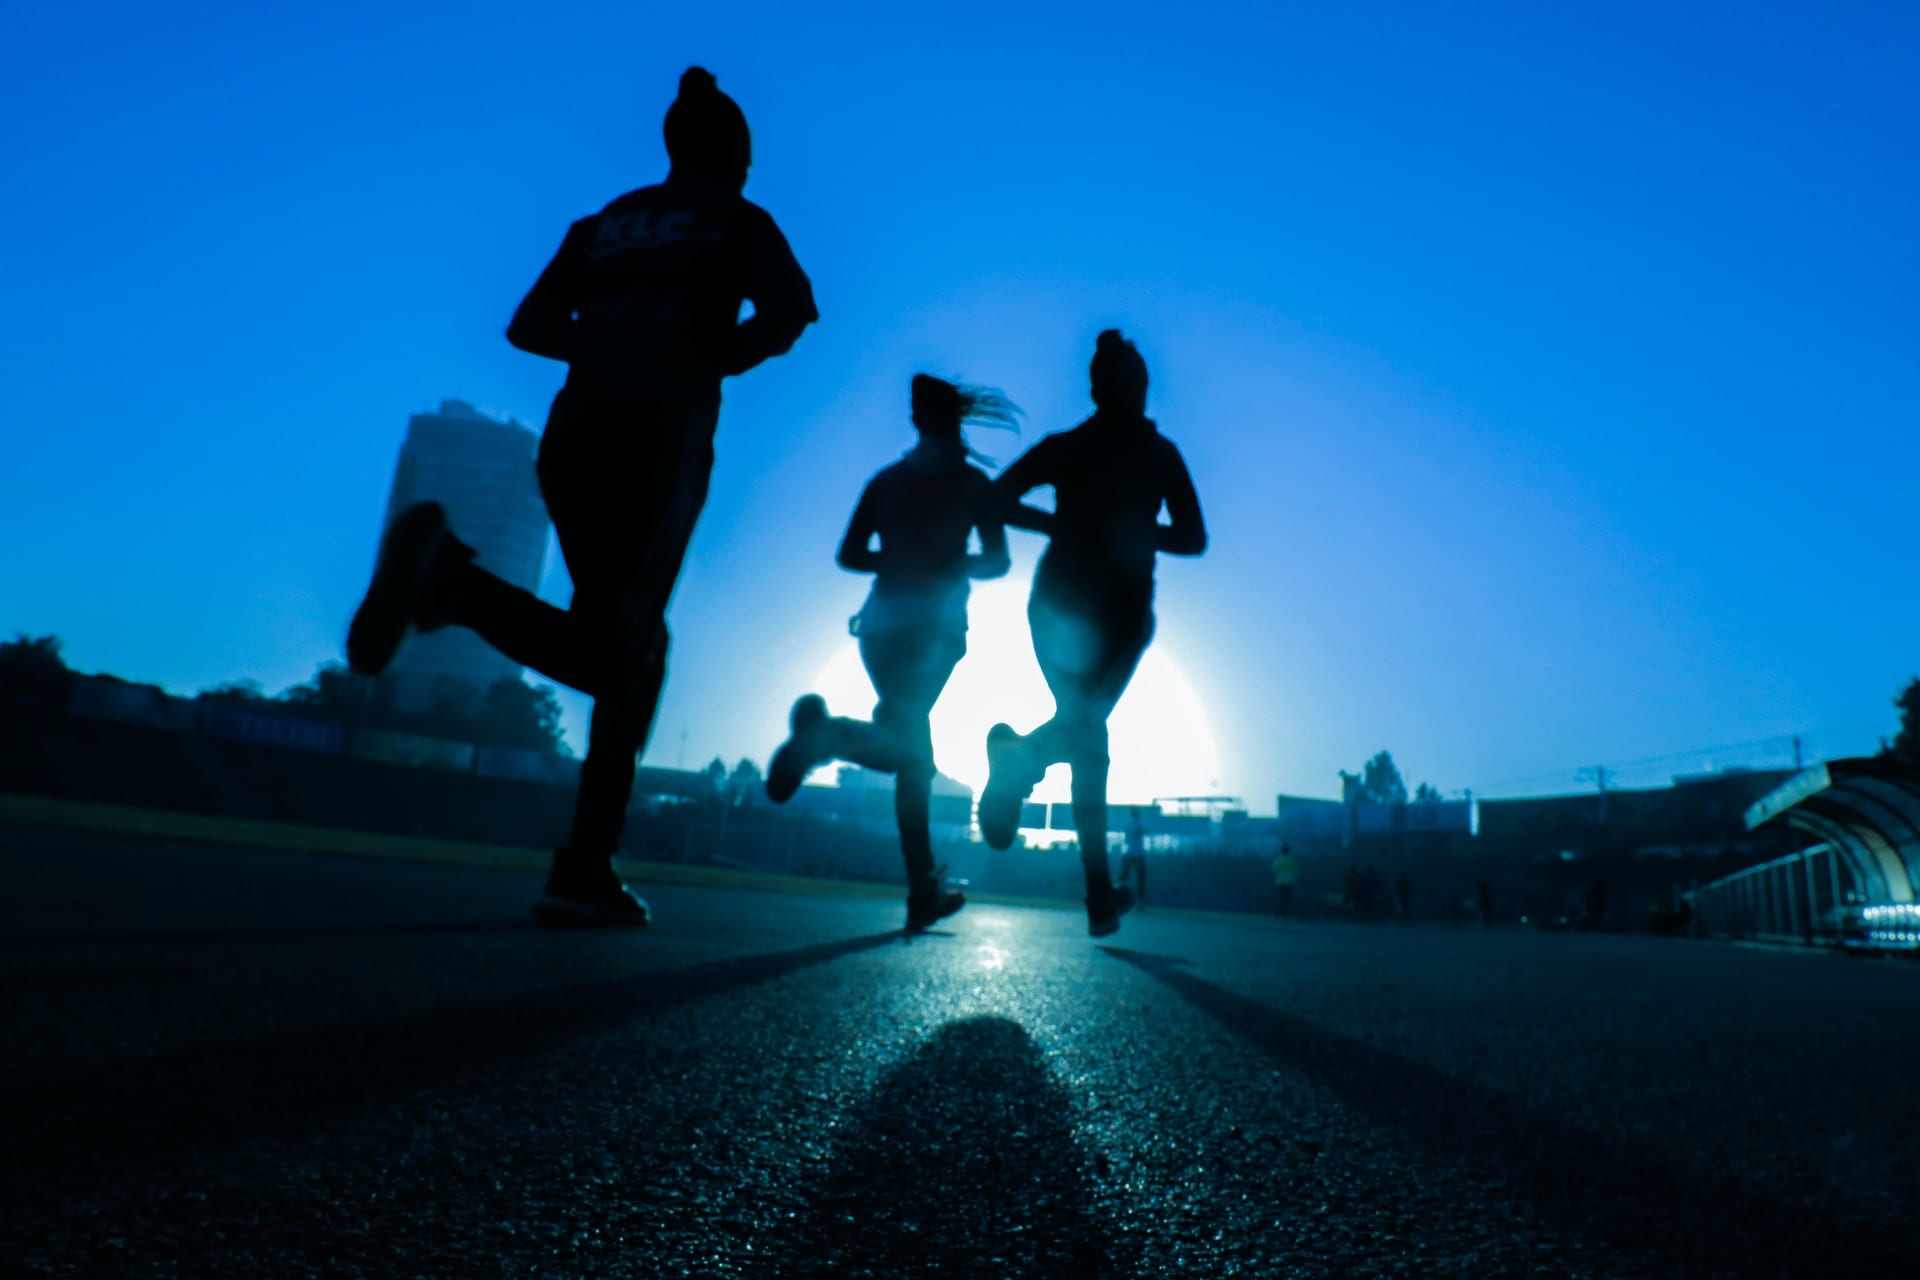 Morning vs evening: What is the best time to run?